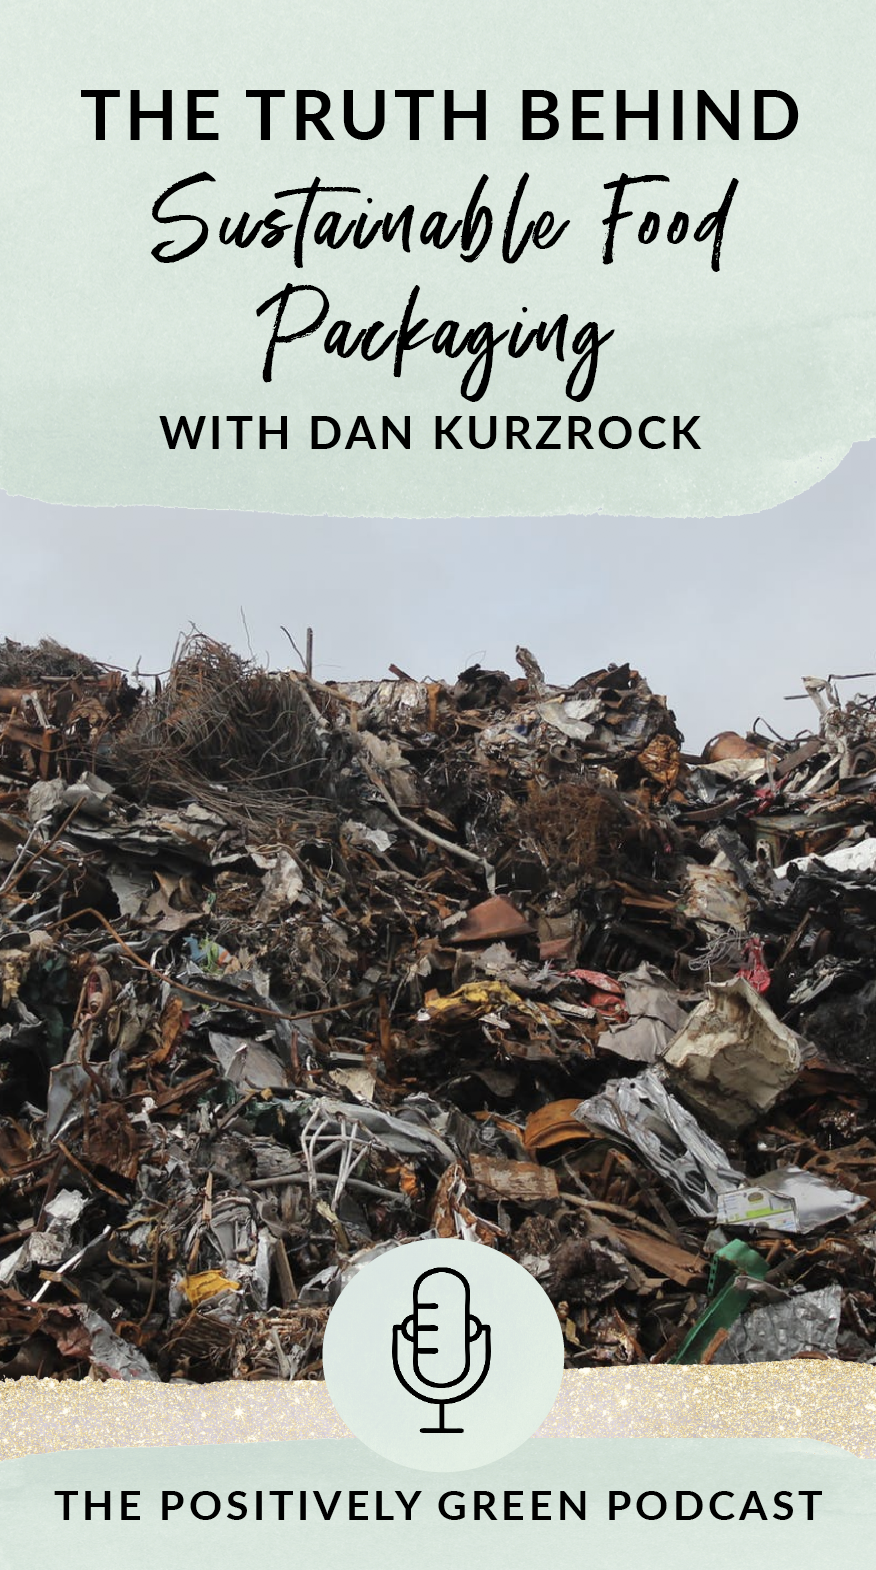 The truth behind sustainable food packaging with Dan Kurzrock The Positively Green Podcast